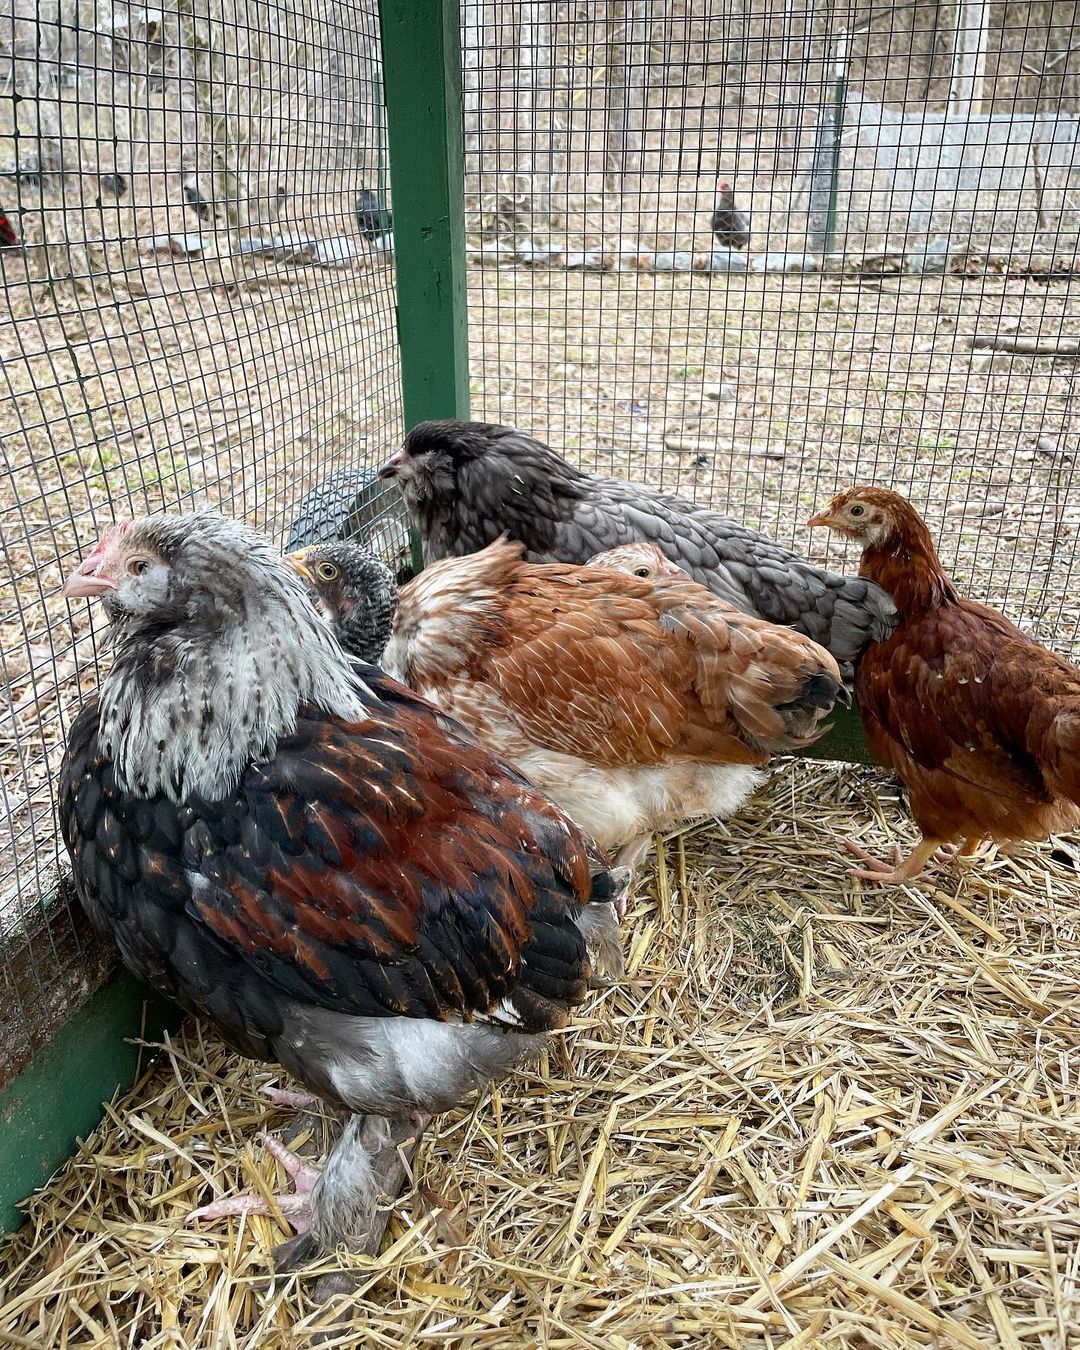 How To Identify a Sick Chicken?